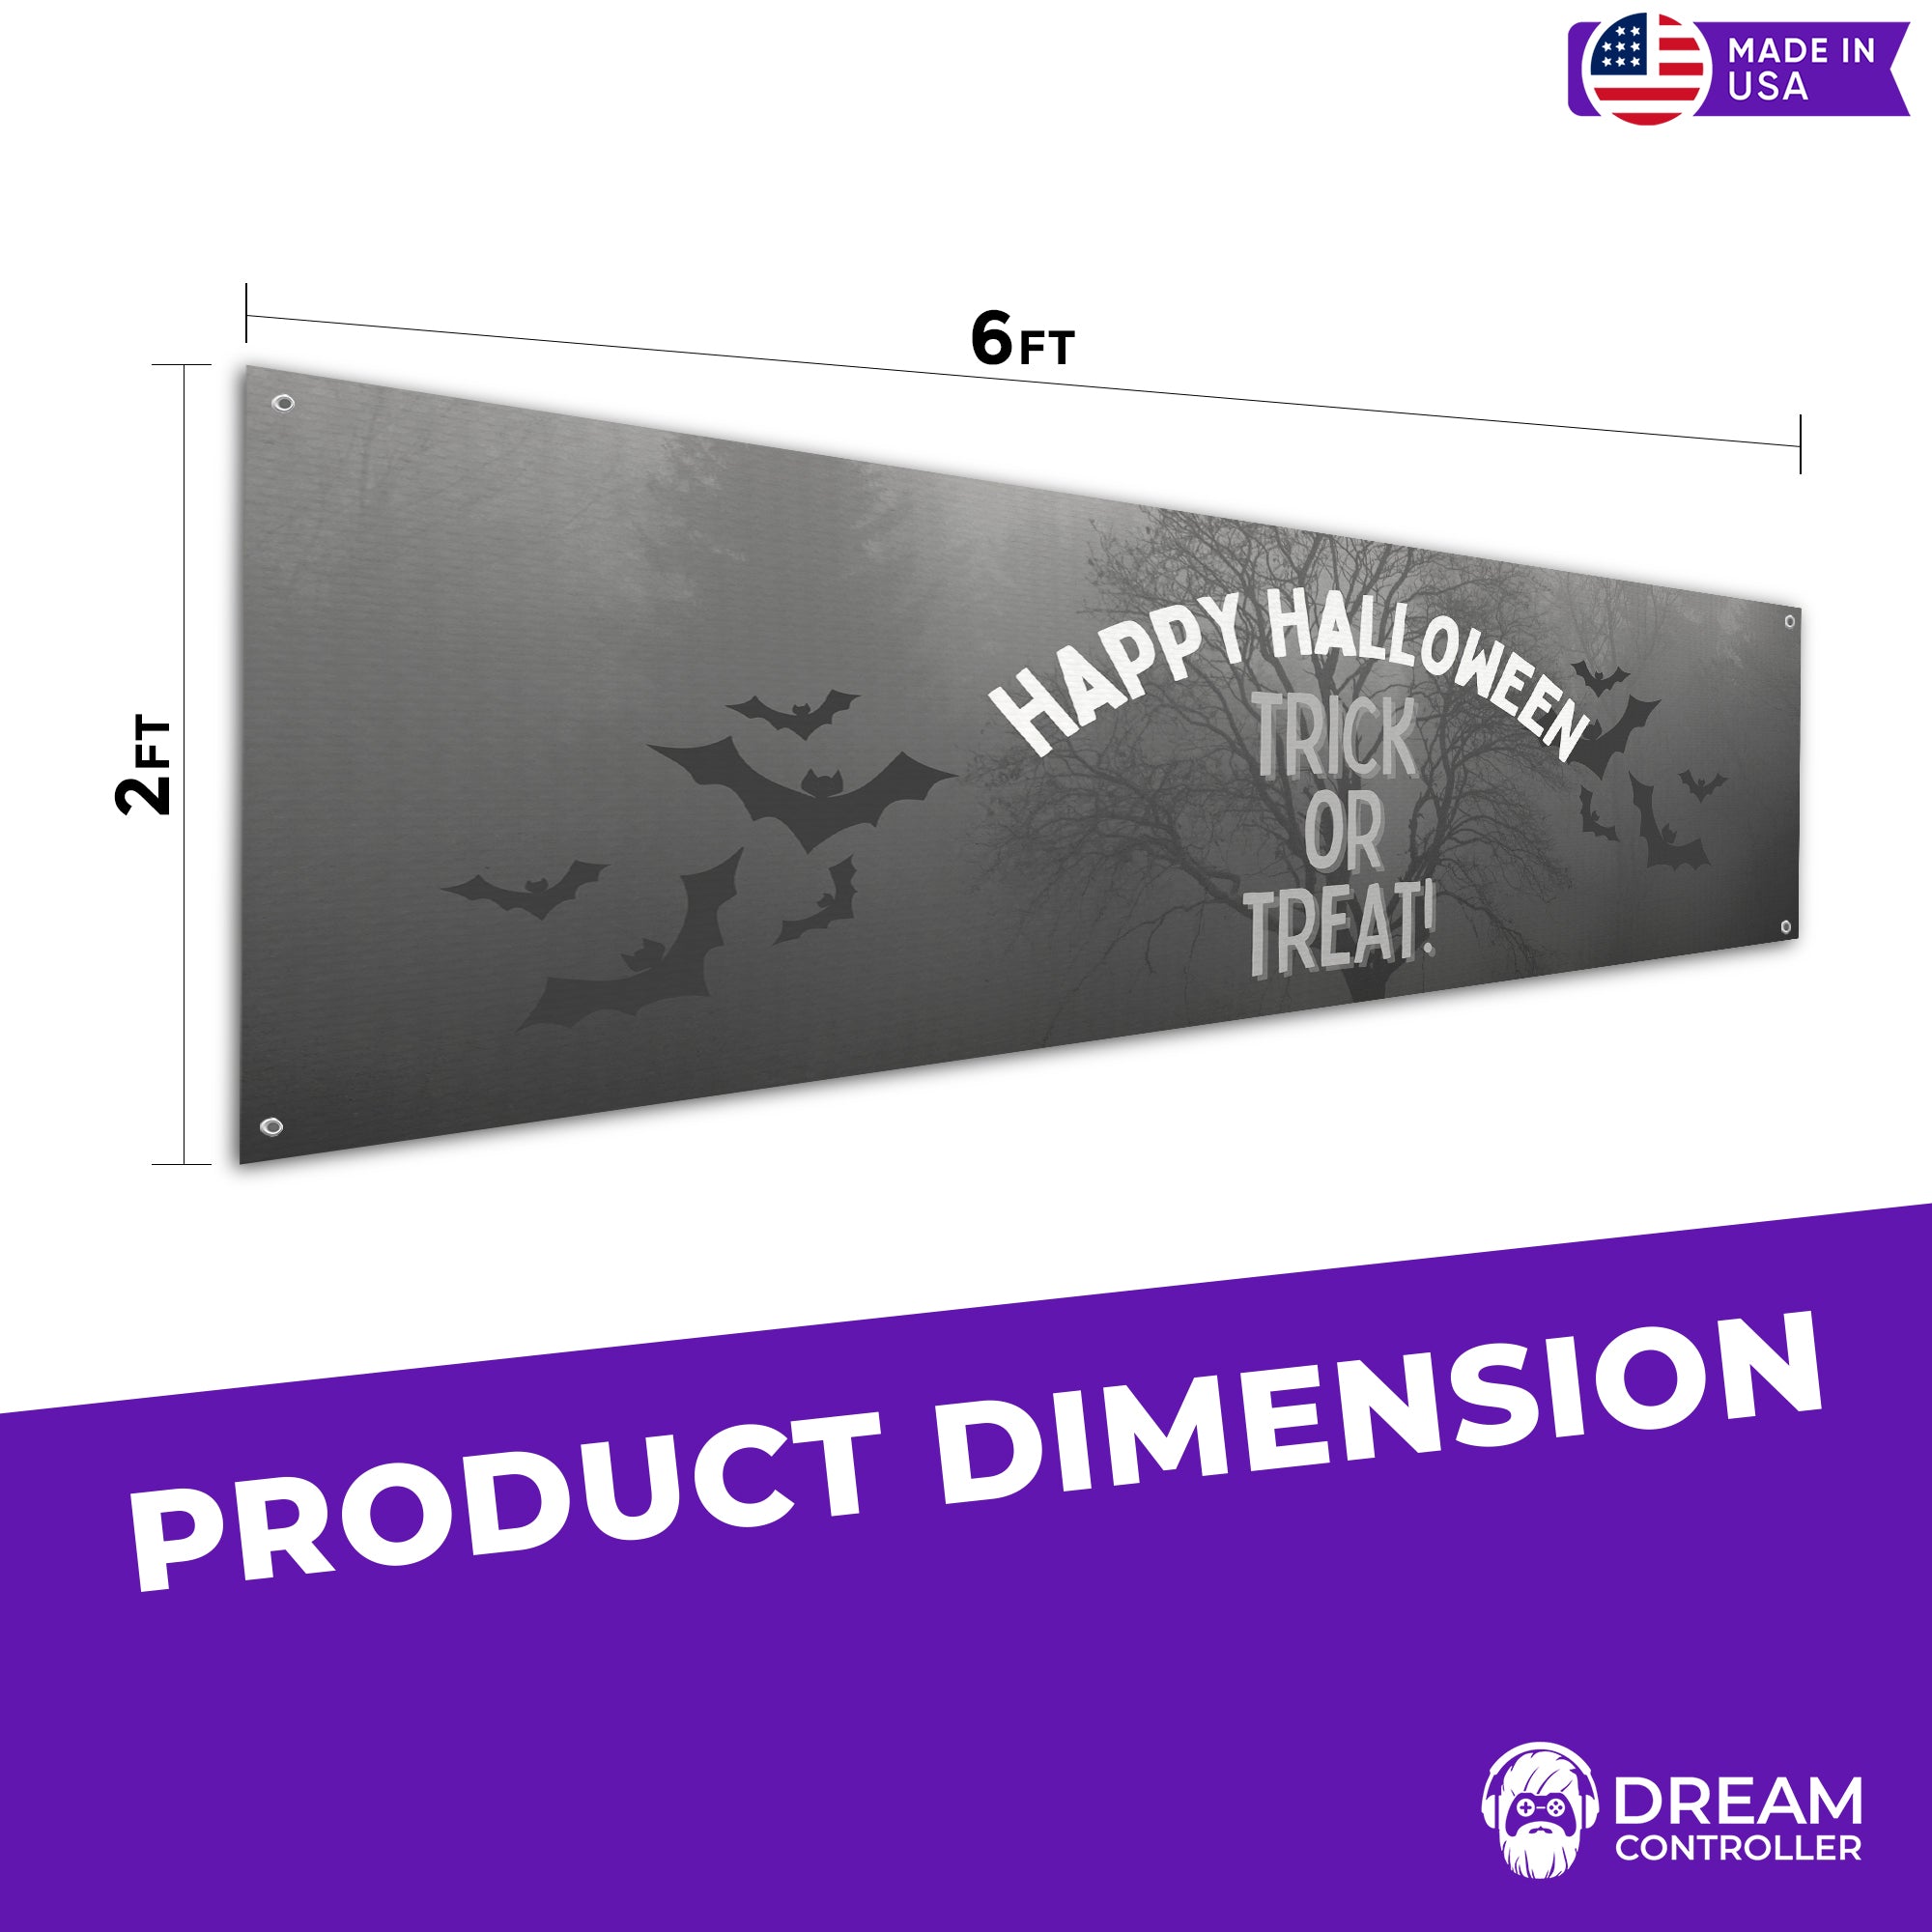 Gray Halloween Banner - Dark and Mysterious Aesthetic, Premium Quality Fabric